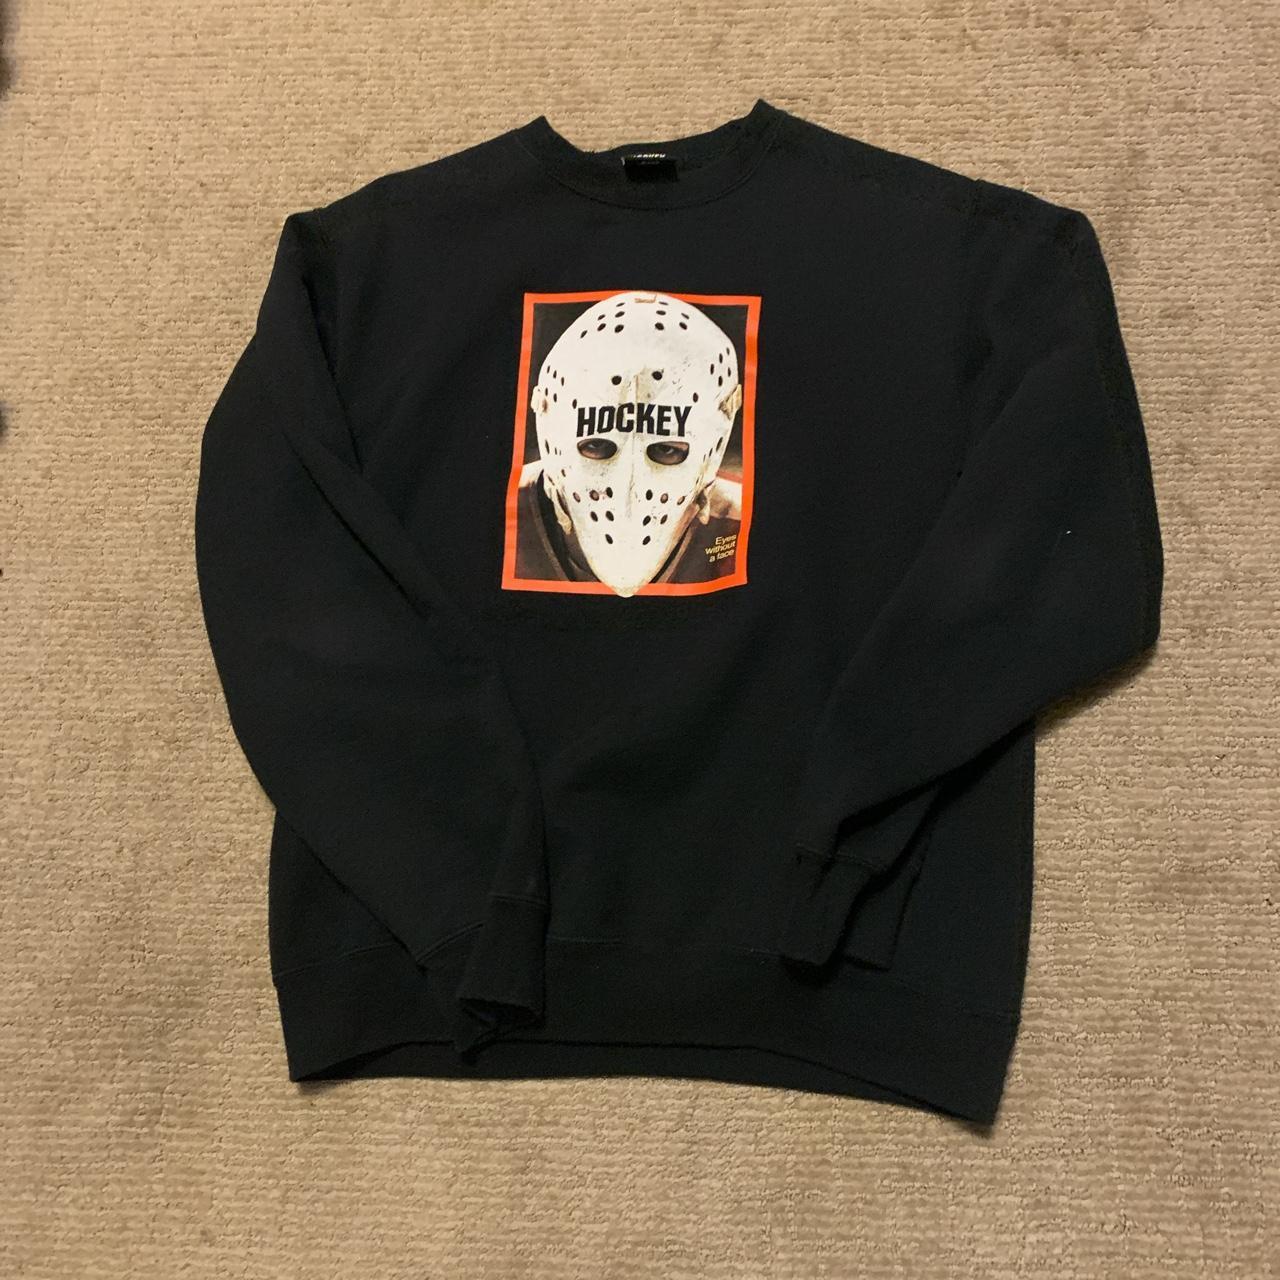 Cool hockey sweater no back design or flaws dm offers - Depop